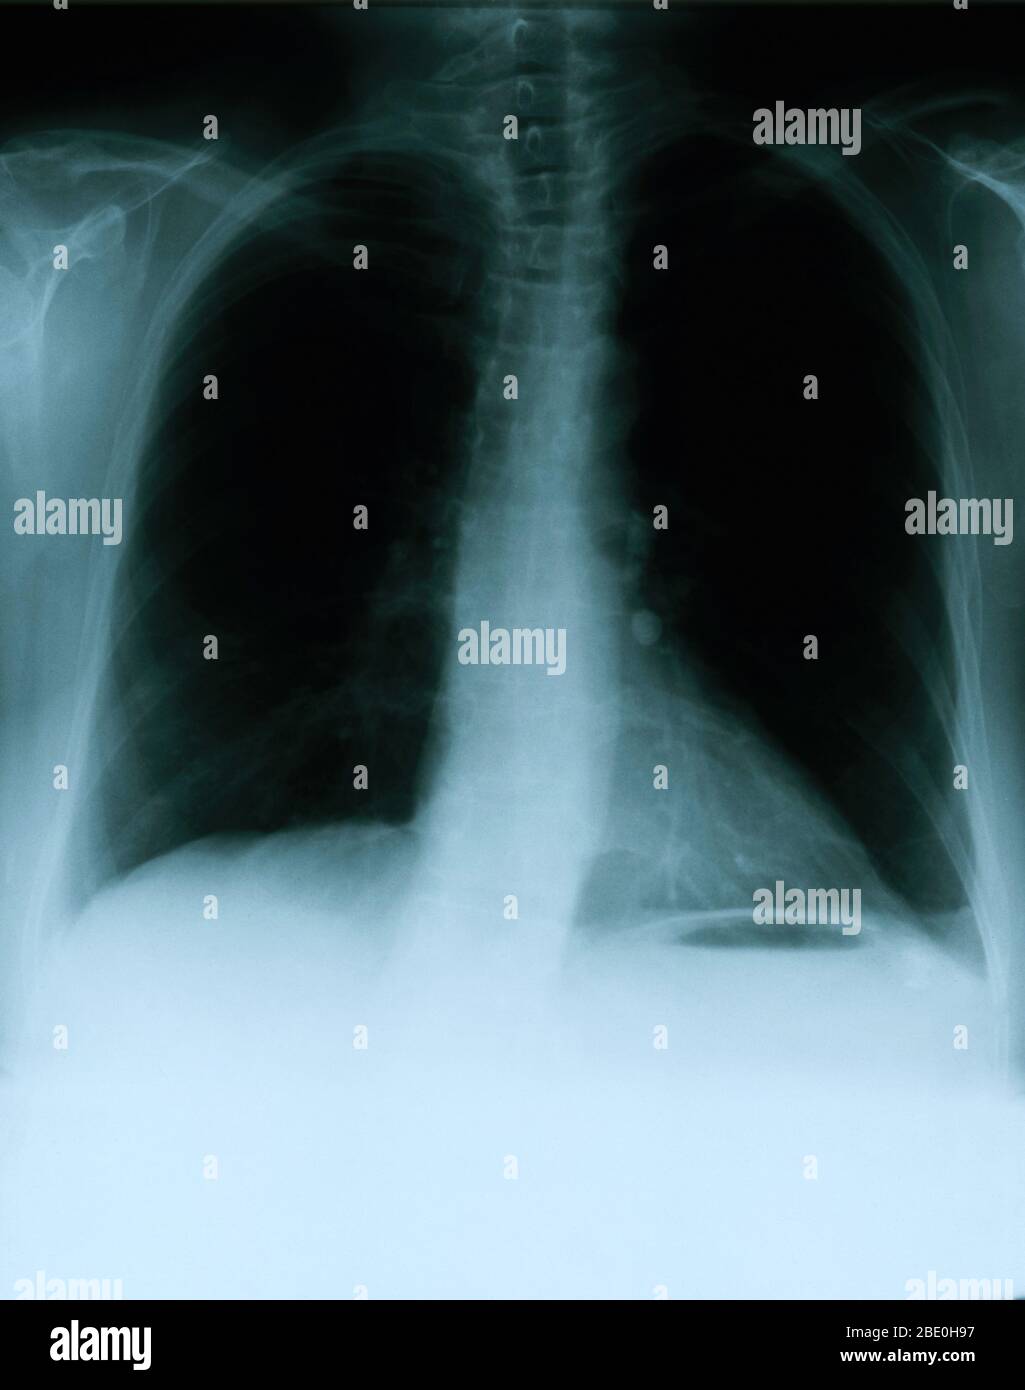 X-ray showing a frontal view of the chest of a 54 year old female. The x-ray shows a calcified left hilar lymph node which most likely resulted from prior granulomatous disease. Also noticeable is a vague area of increased density within the lateral aspect of the right apex, and a mild scoliotic deformity of the dorsal spine. Stock Photo